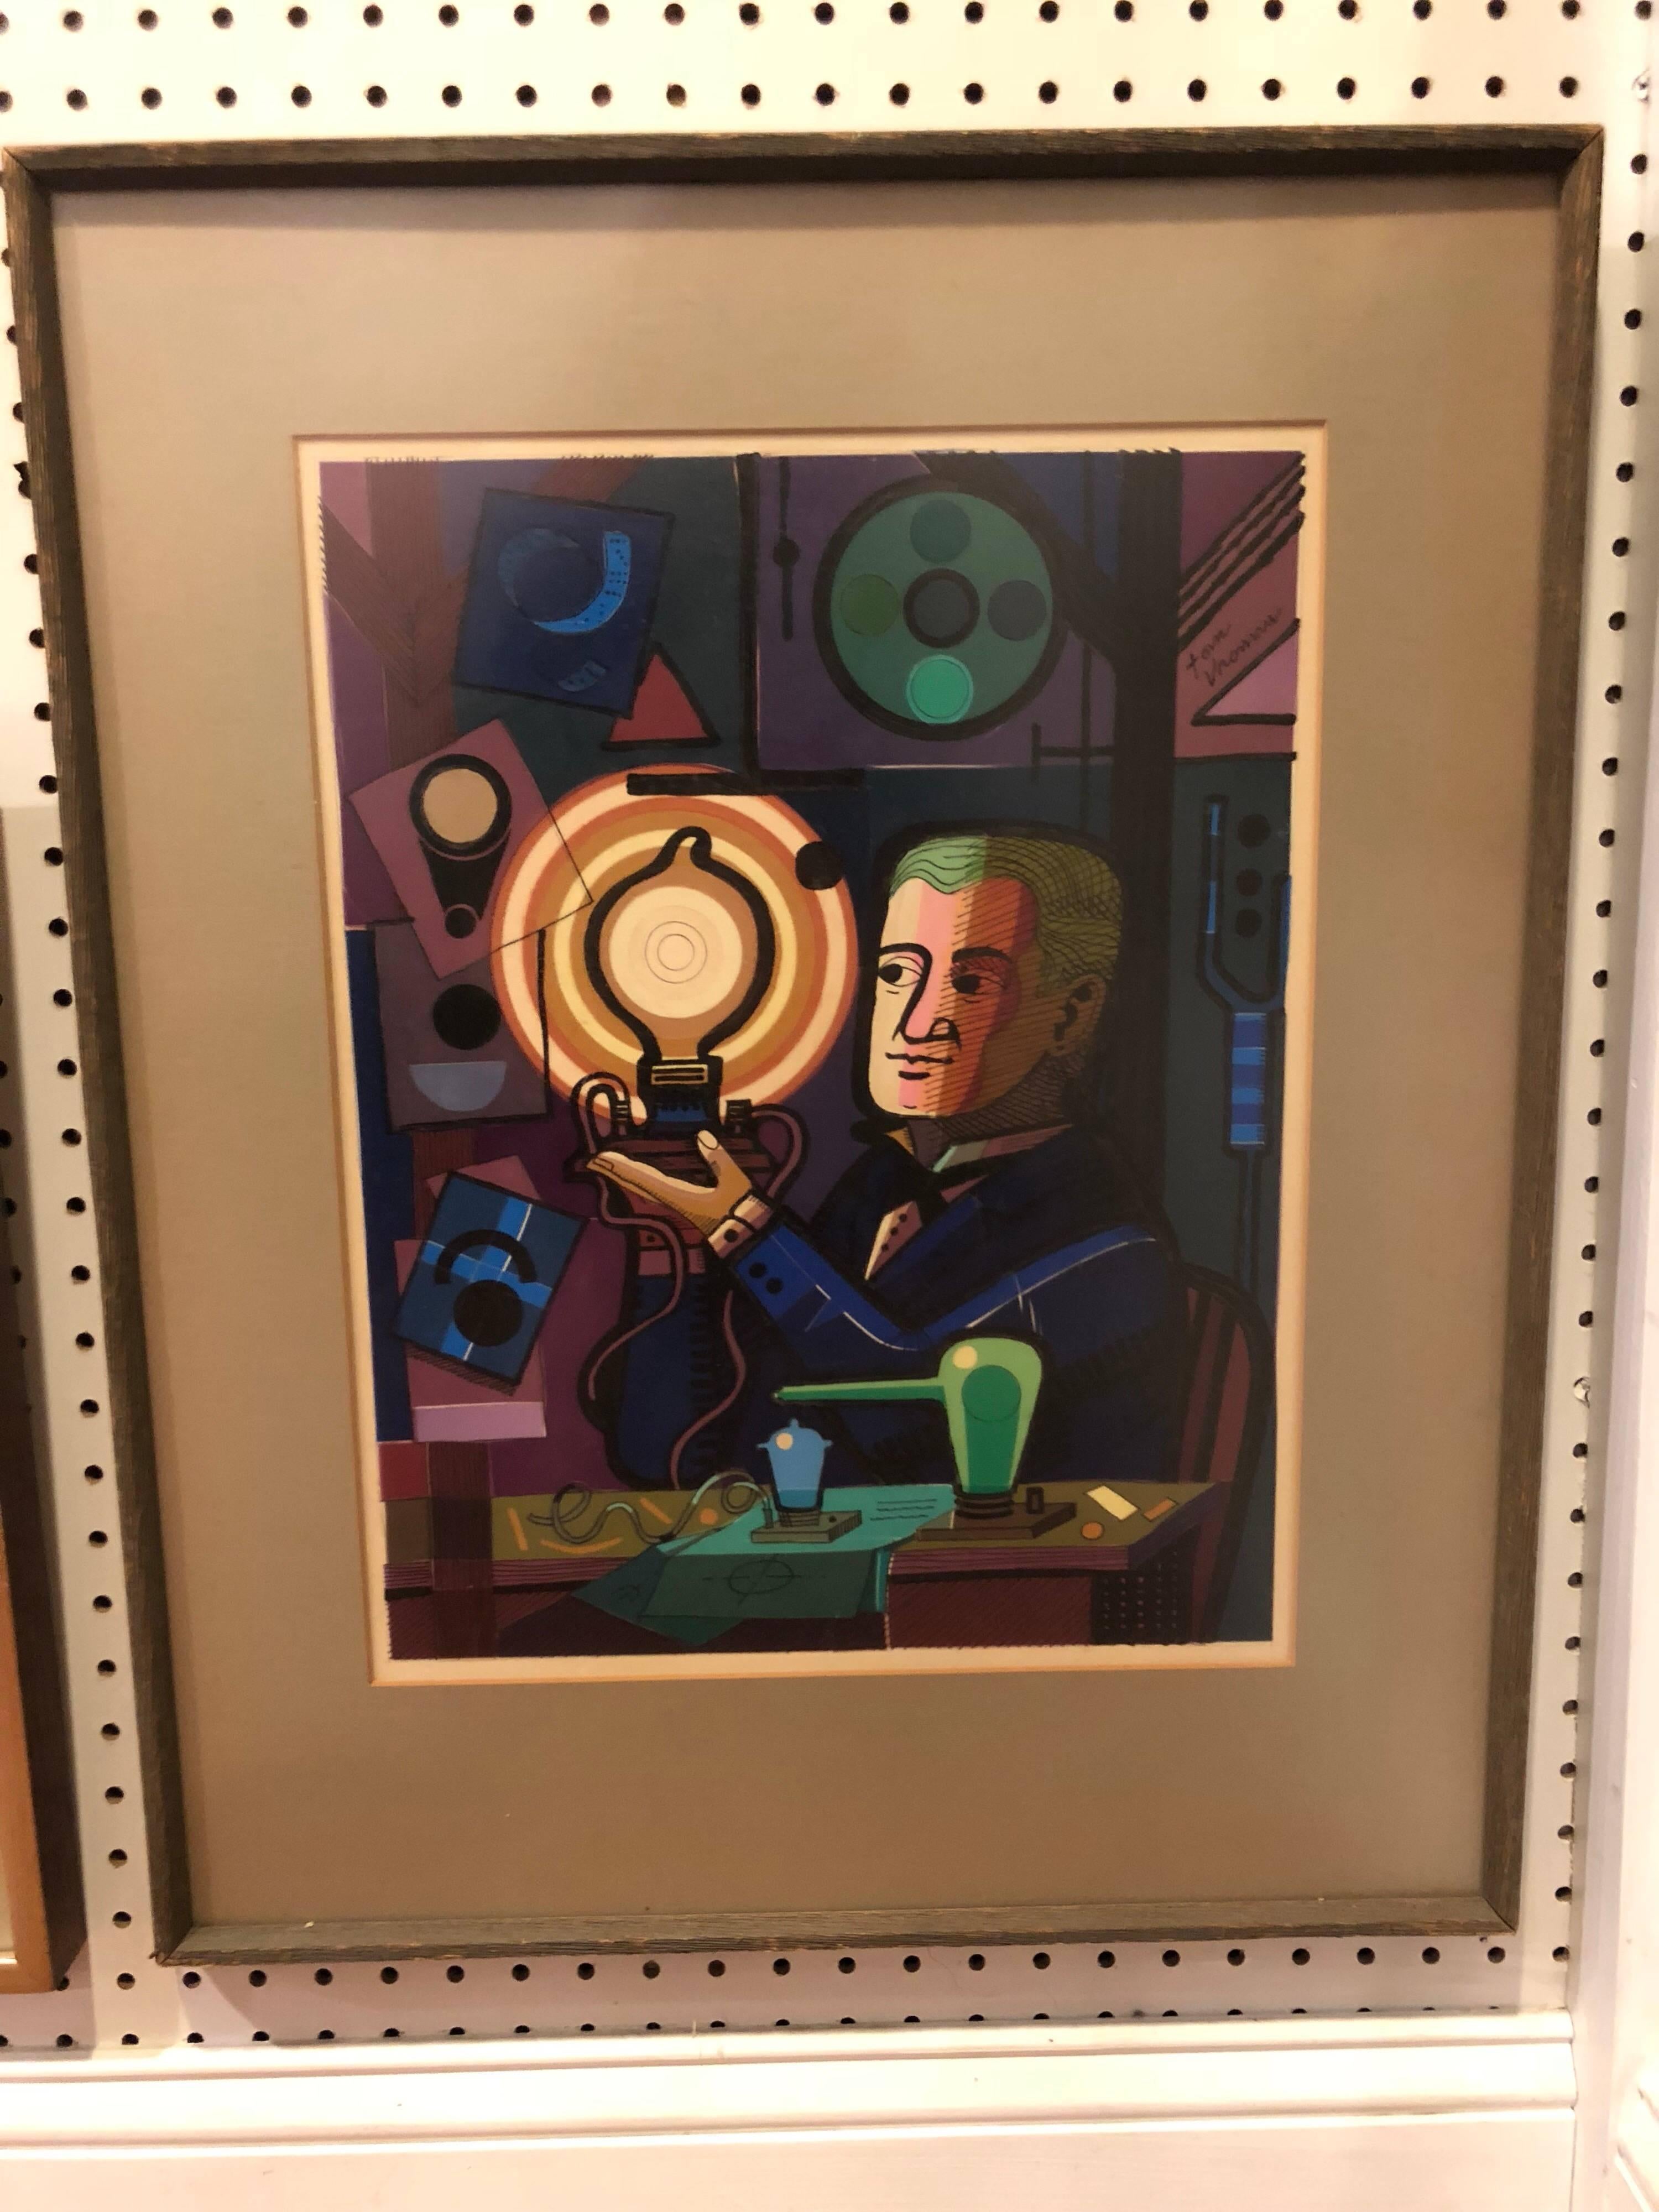 Thom Vromen signed colored lithograph we think portraying Thomas Edison. Vromen was a famous midcentury illustrator who attended the Beaux Art School in Paris. He graduated from the University of the Arts in Philadelphia, Pennsylvania and began a